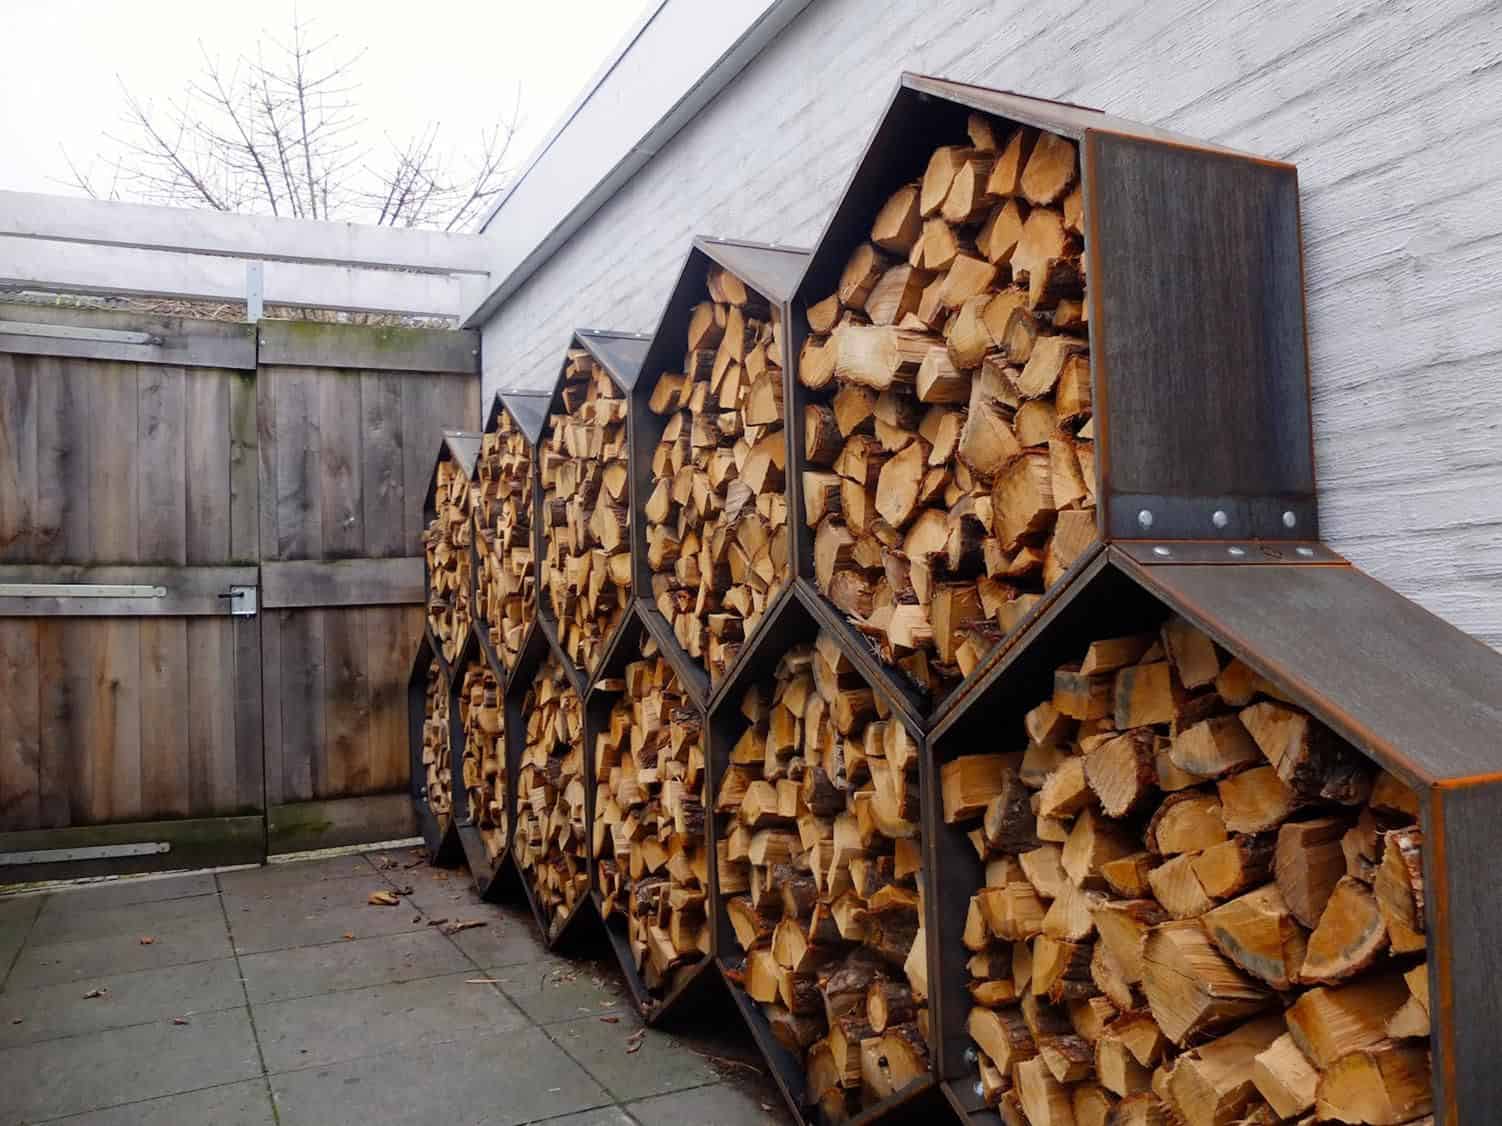 Storing your firewood properly in an aesthetic hexagon shaped storage